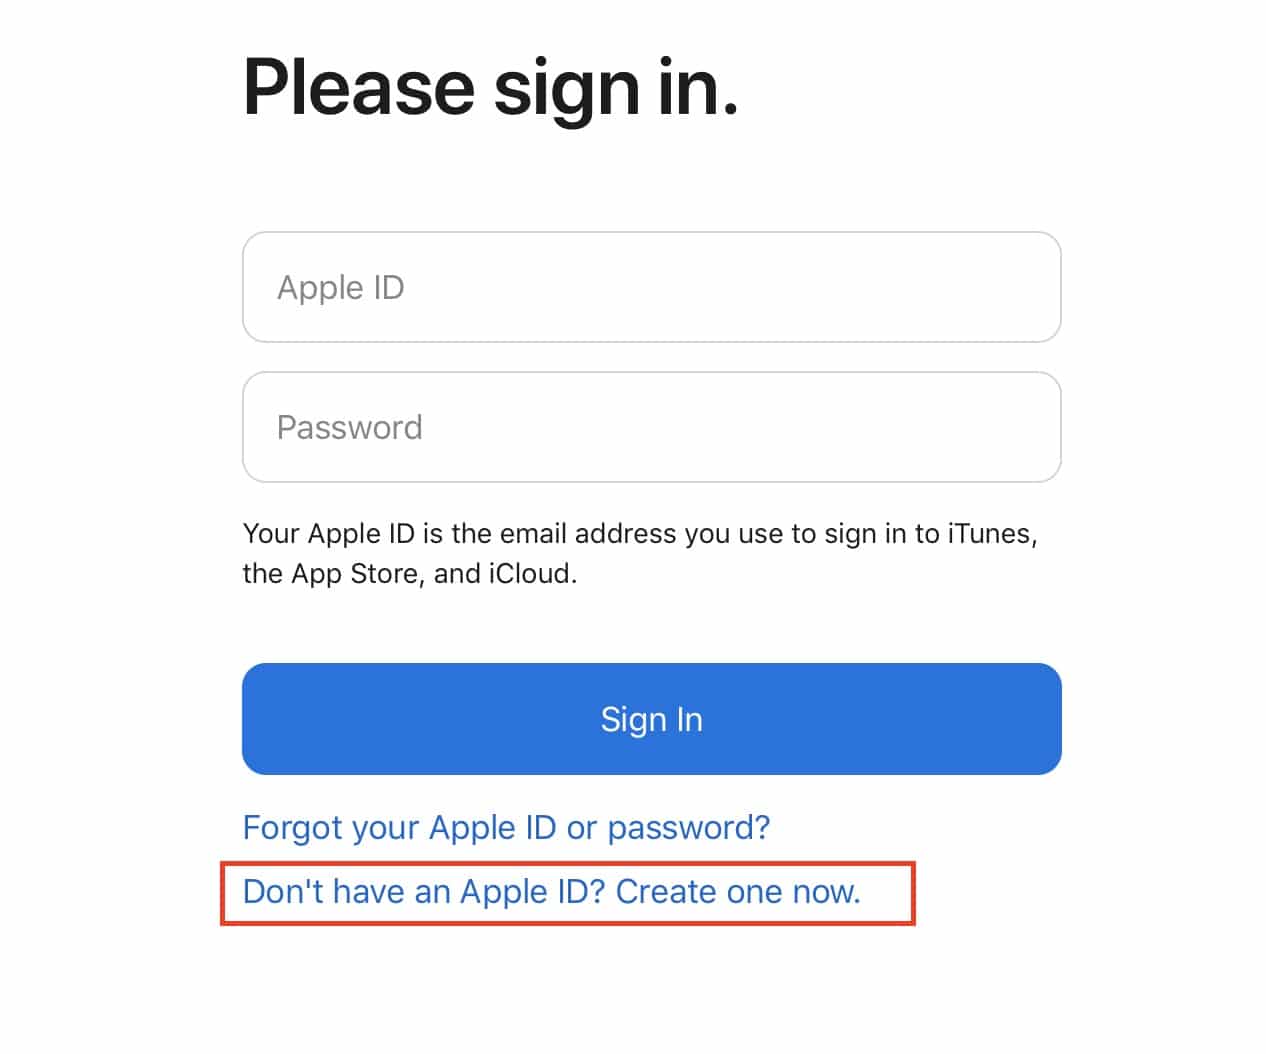 How to get an Apple ID for your iPhone